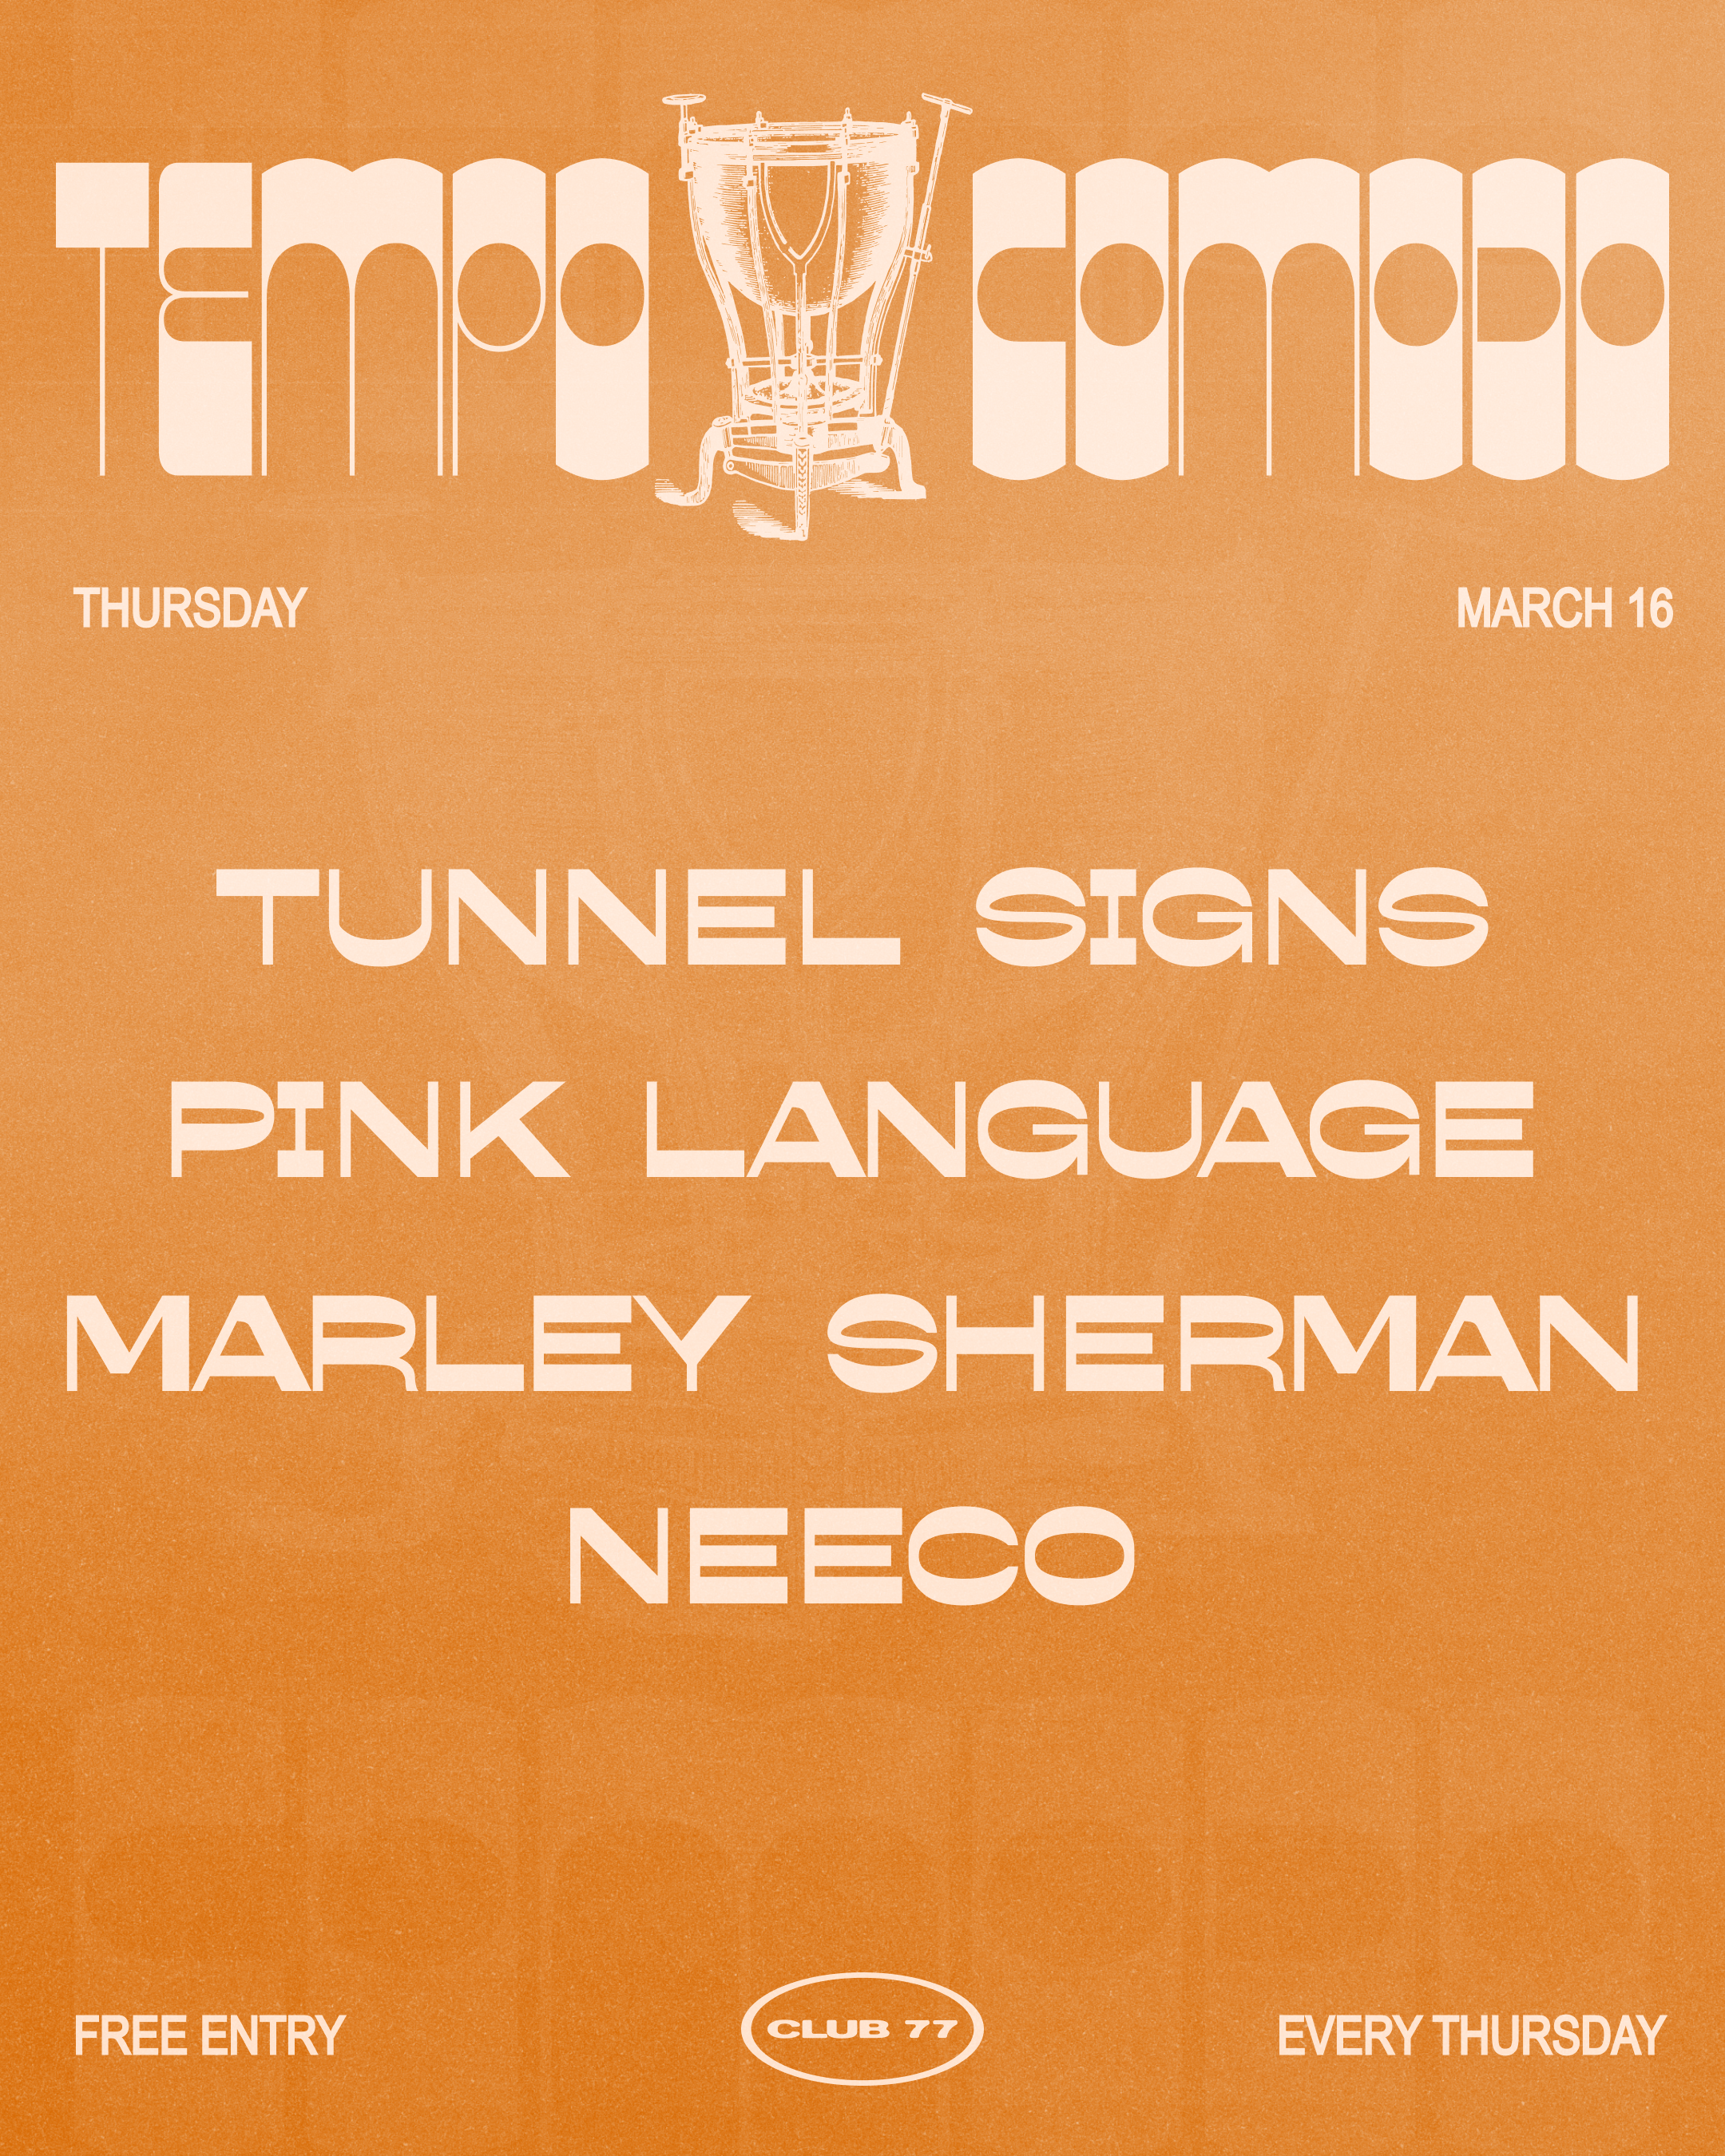 Tempo Comodo #44 with Tunnel Signs, Pink Language, Marley Sherman and Neeco - Página frontal